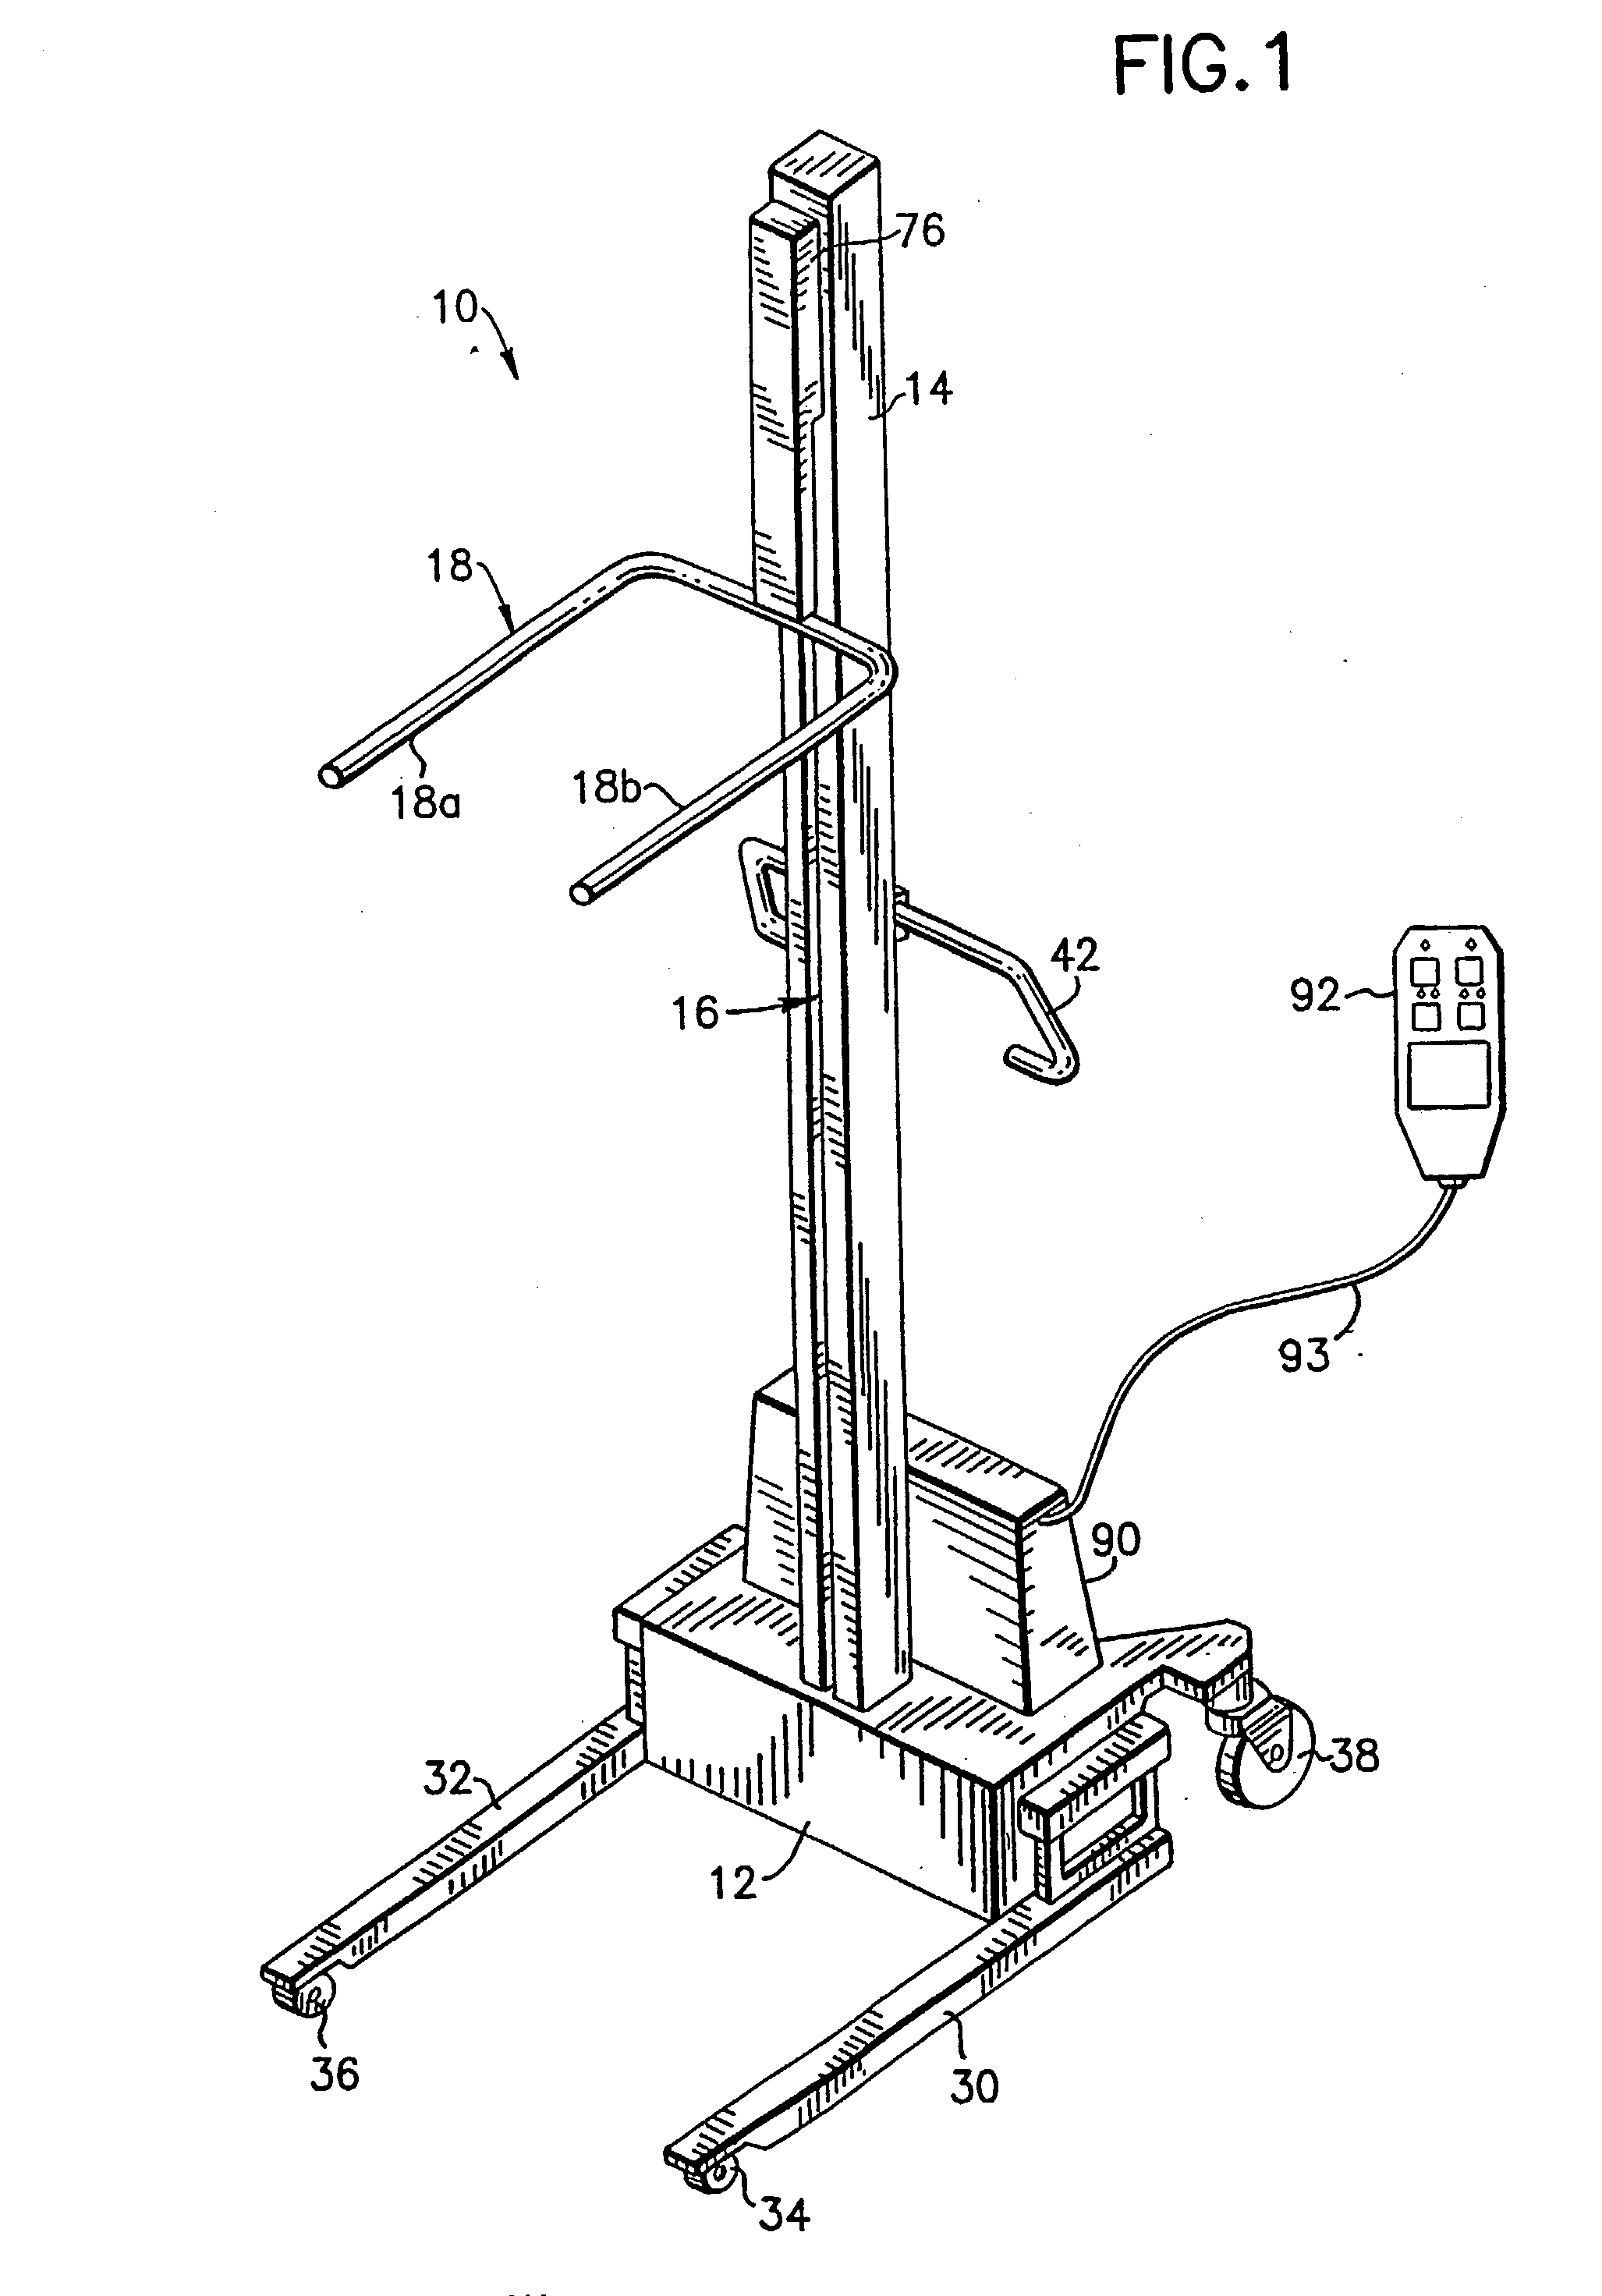 Variable straddle transporter lift with programmable height positions